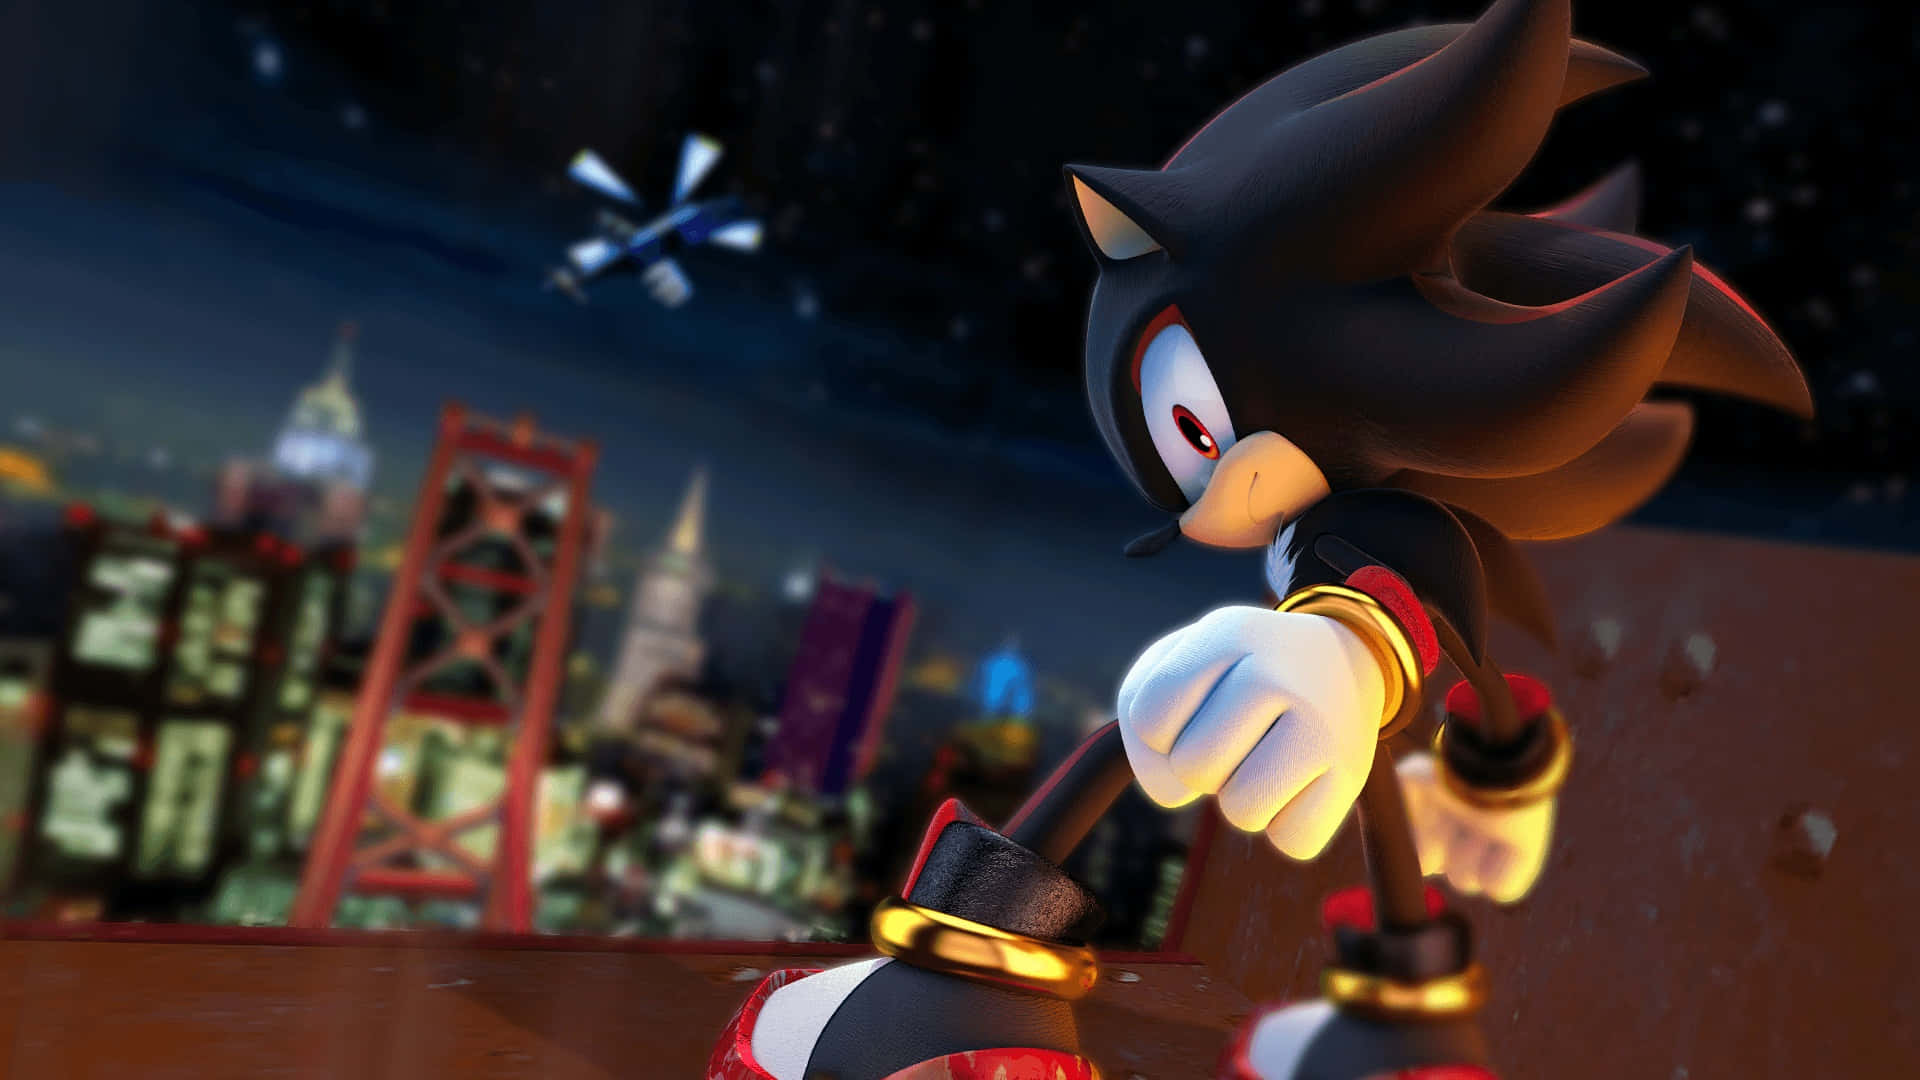 Sonic City Escape - Sonic the Hedgehog dashes through the urban jungle in an adrenaline-pumping adventure. Wallpaper